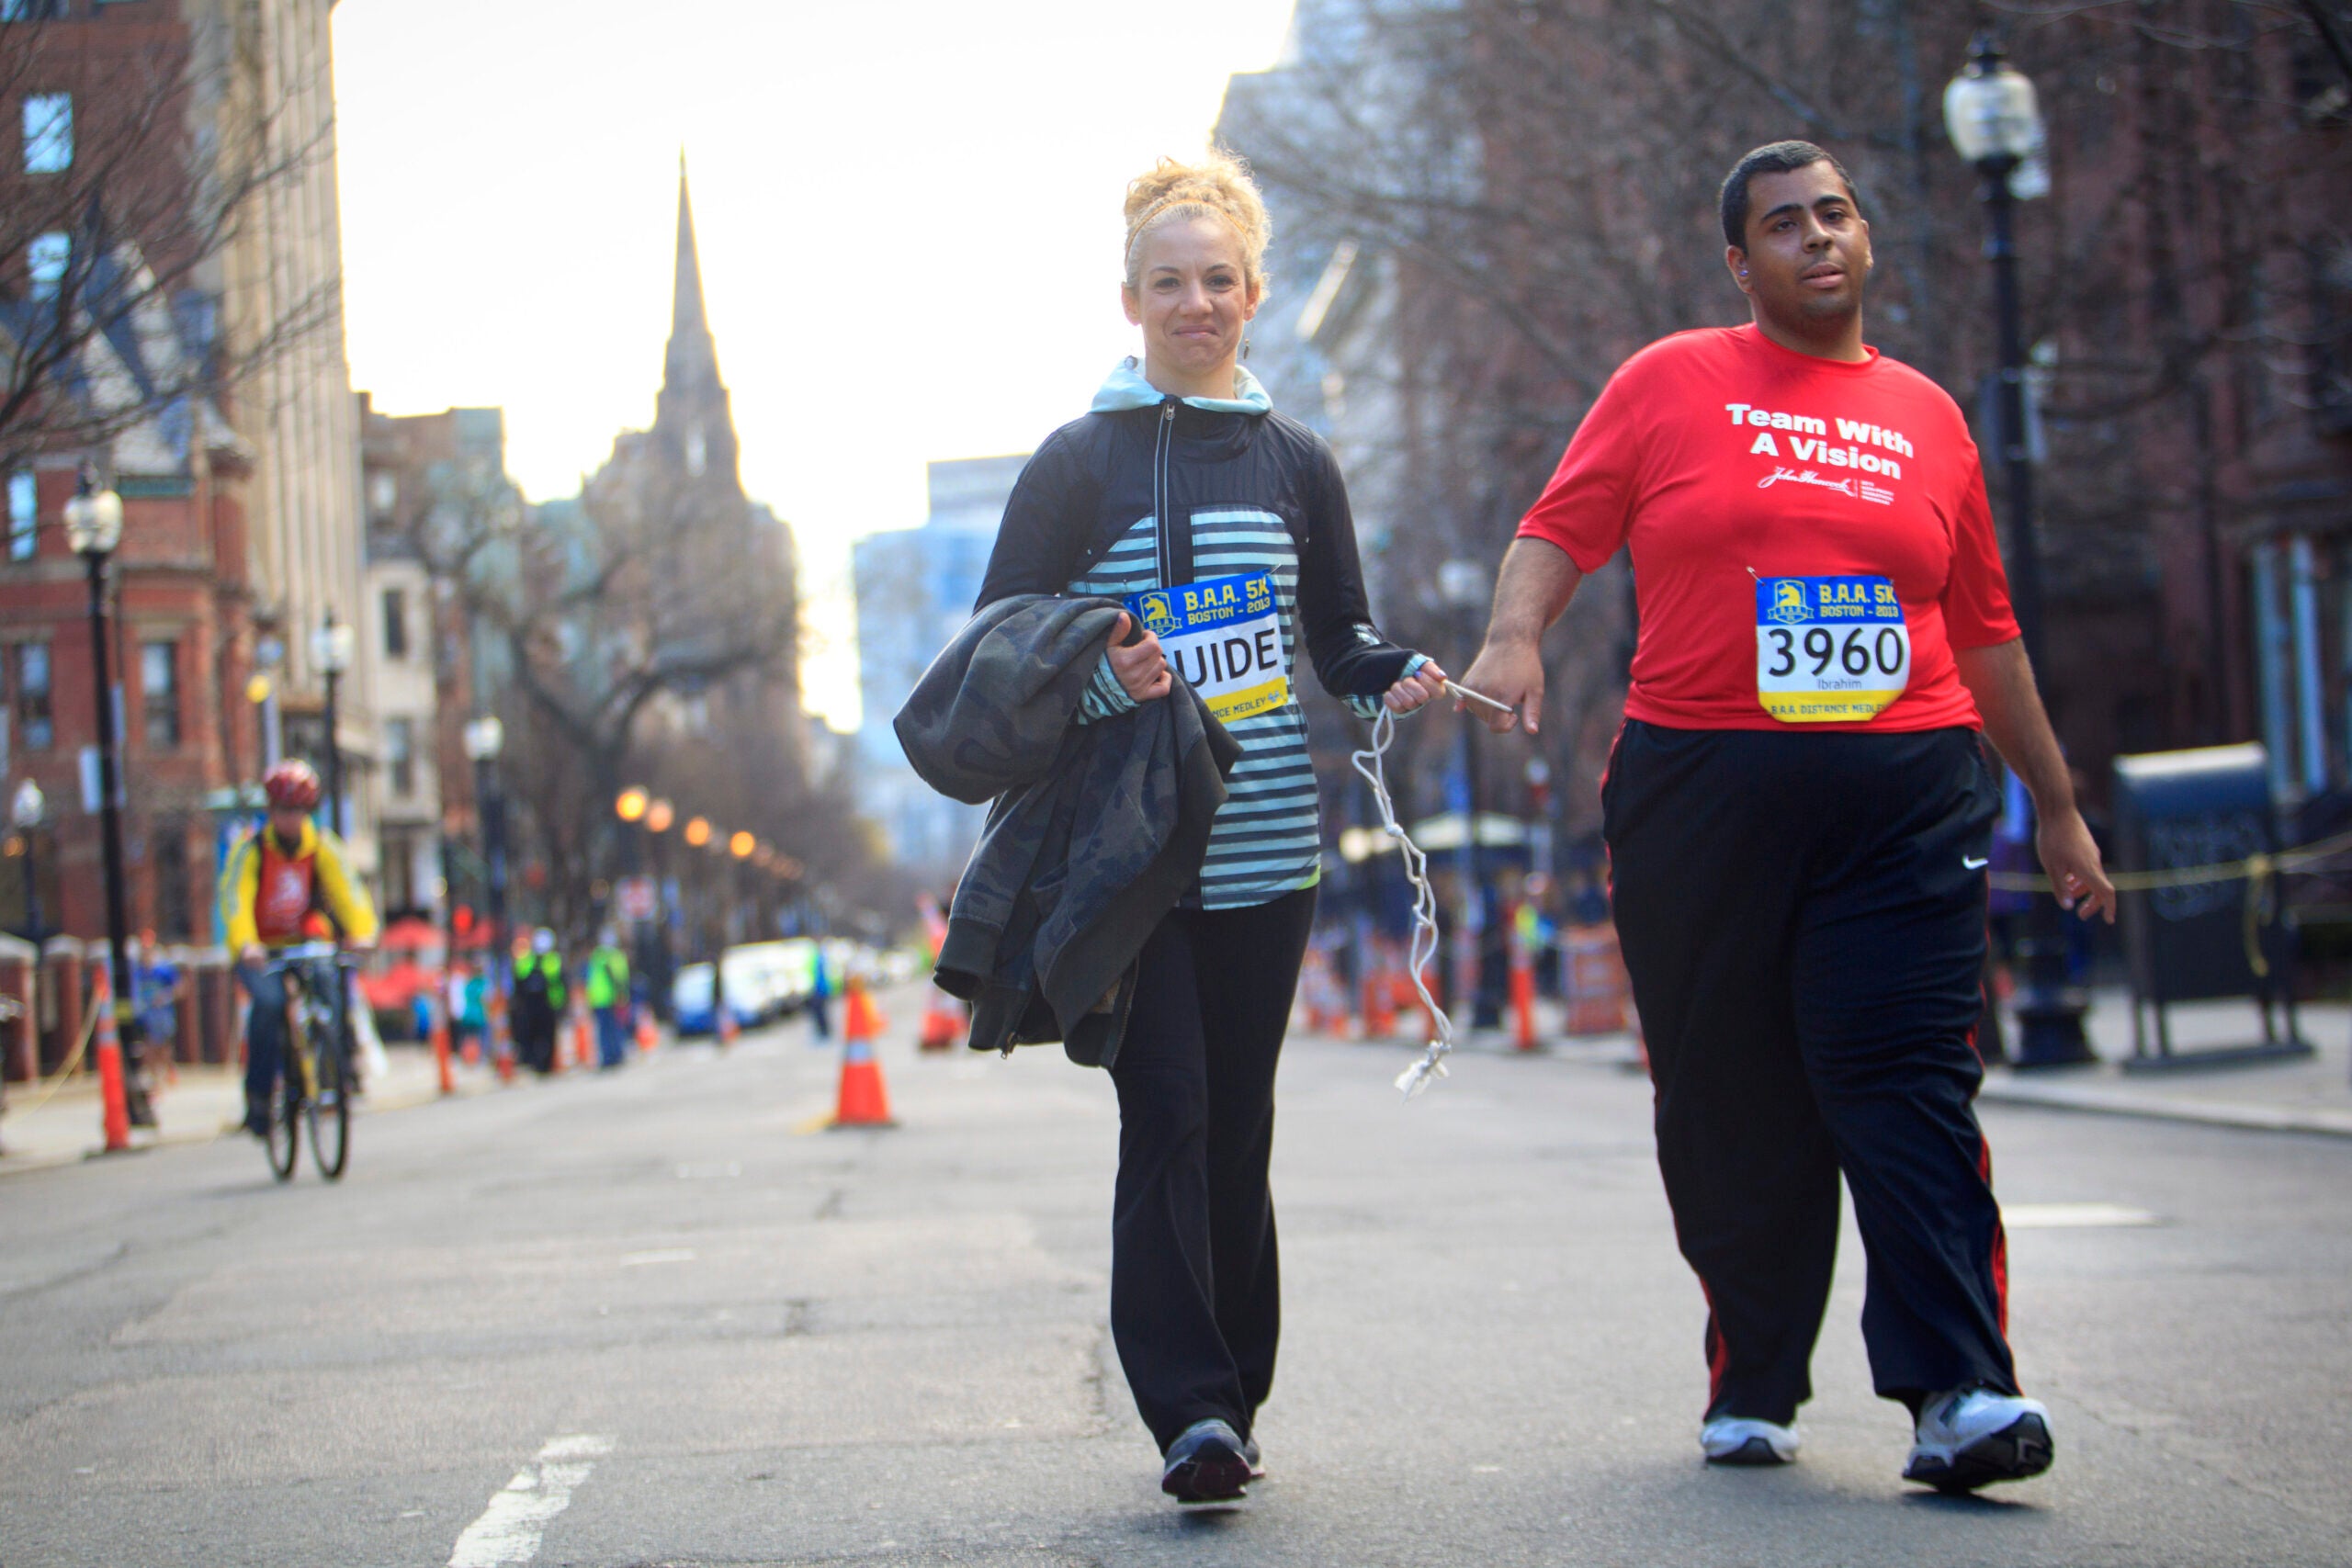 BAA 5K and Invitational Miles excite running fans in Back Bay